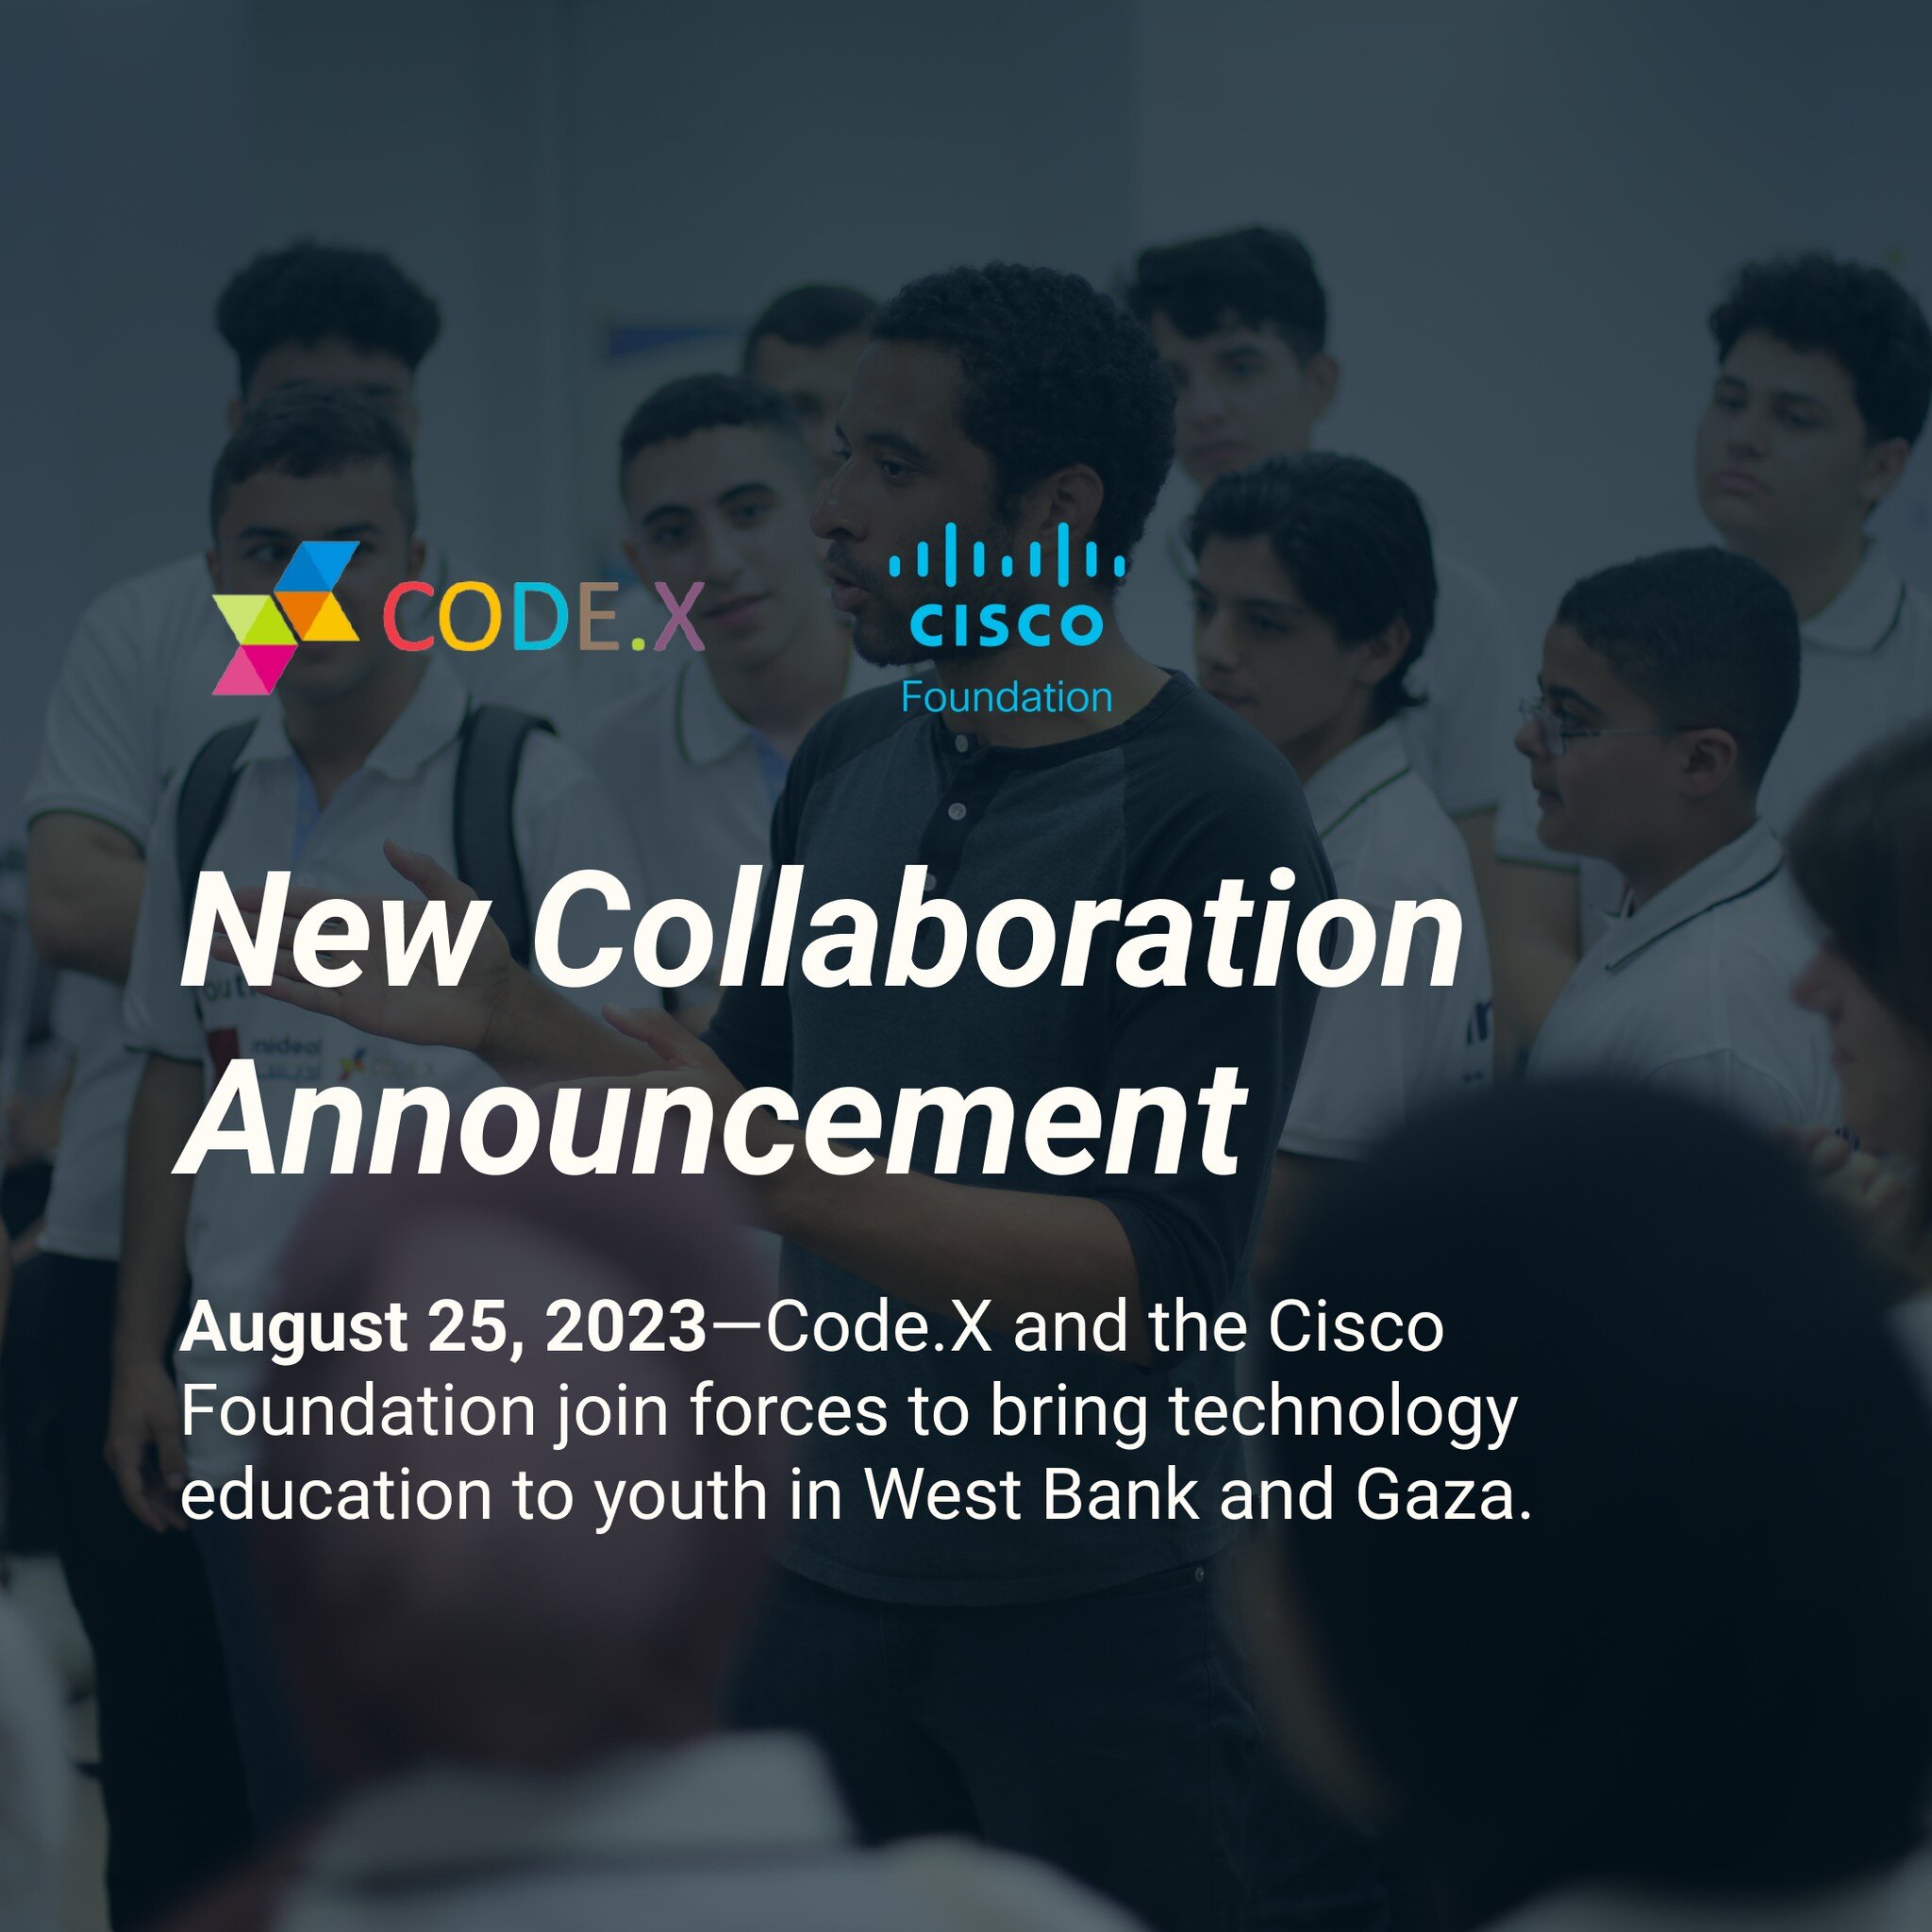 Announcement! 🌟 We are thrilled to announce a new collaboration between Code.X and the Cisco Foundation, aimed at expanding technology and entrepreneurship programs for youth in Palestine.

After hosting our flagship educational summer camp program 